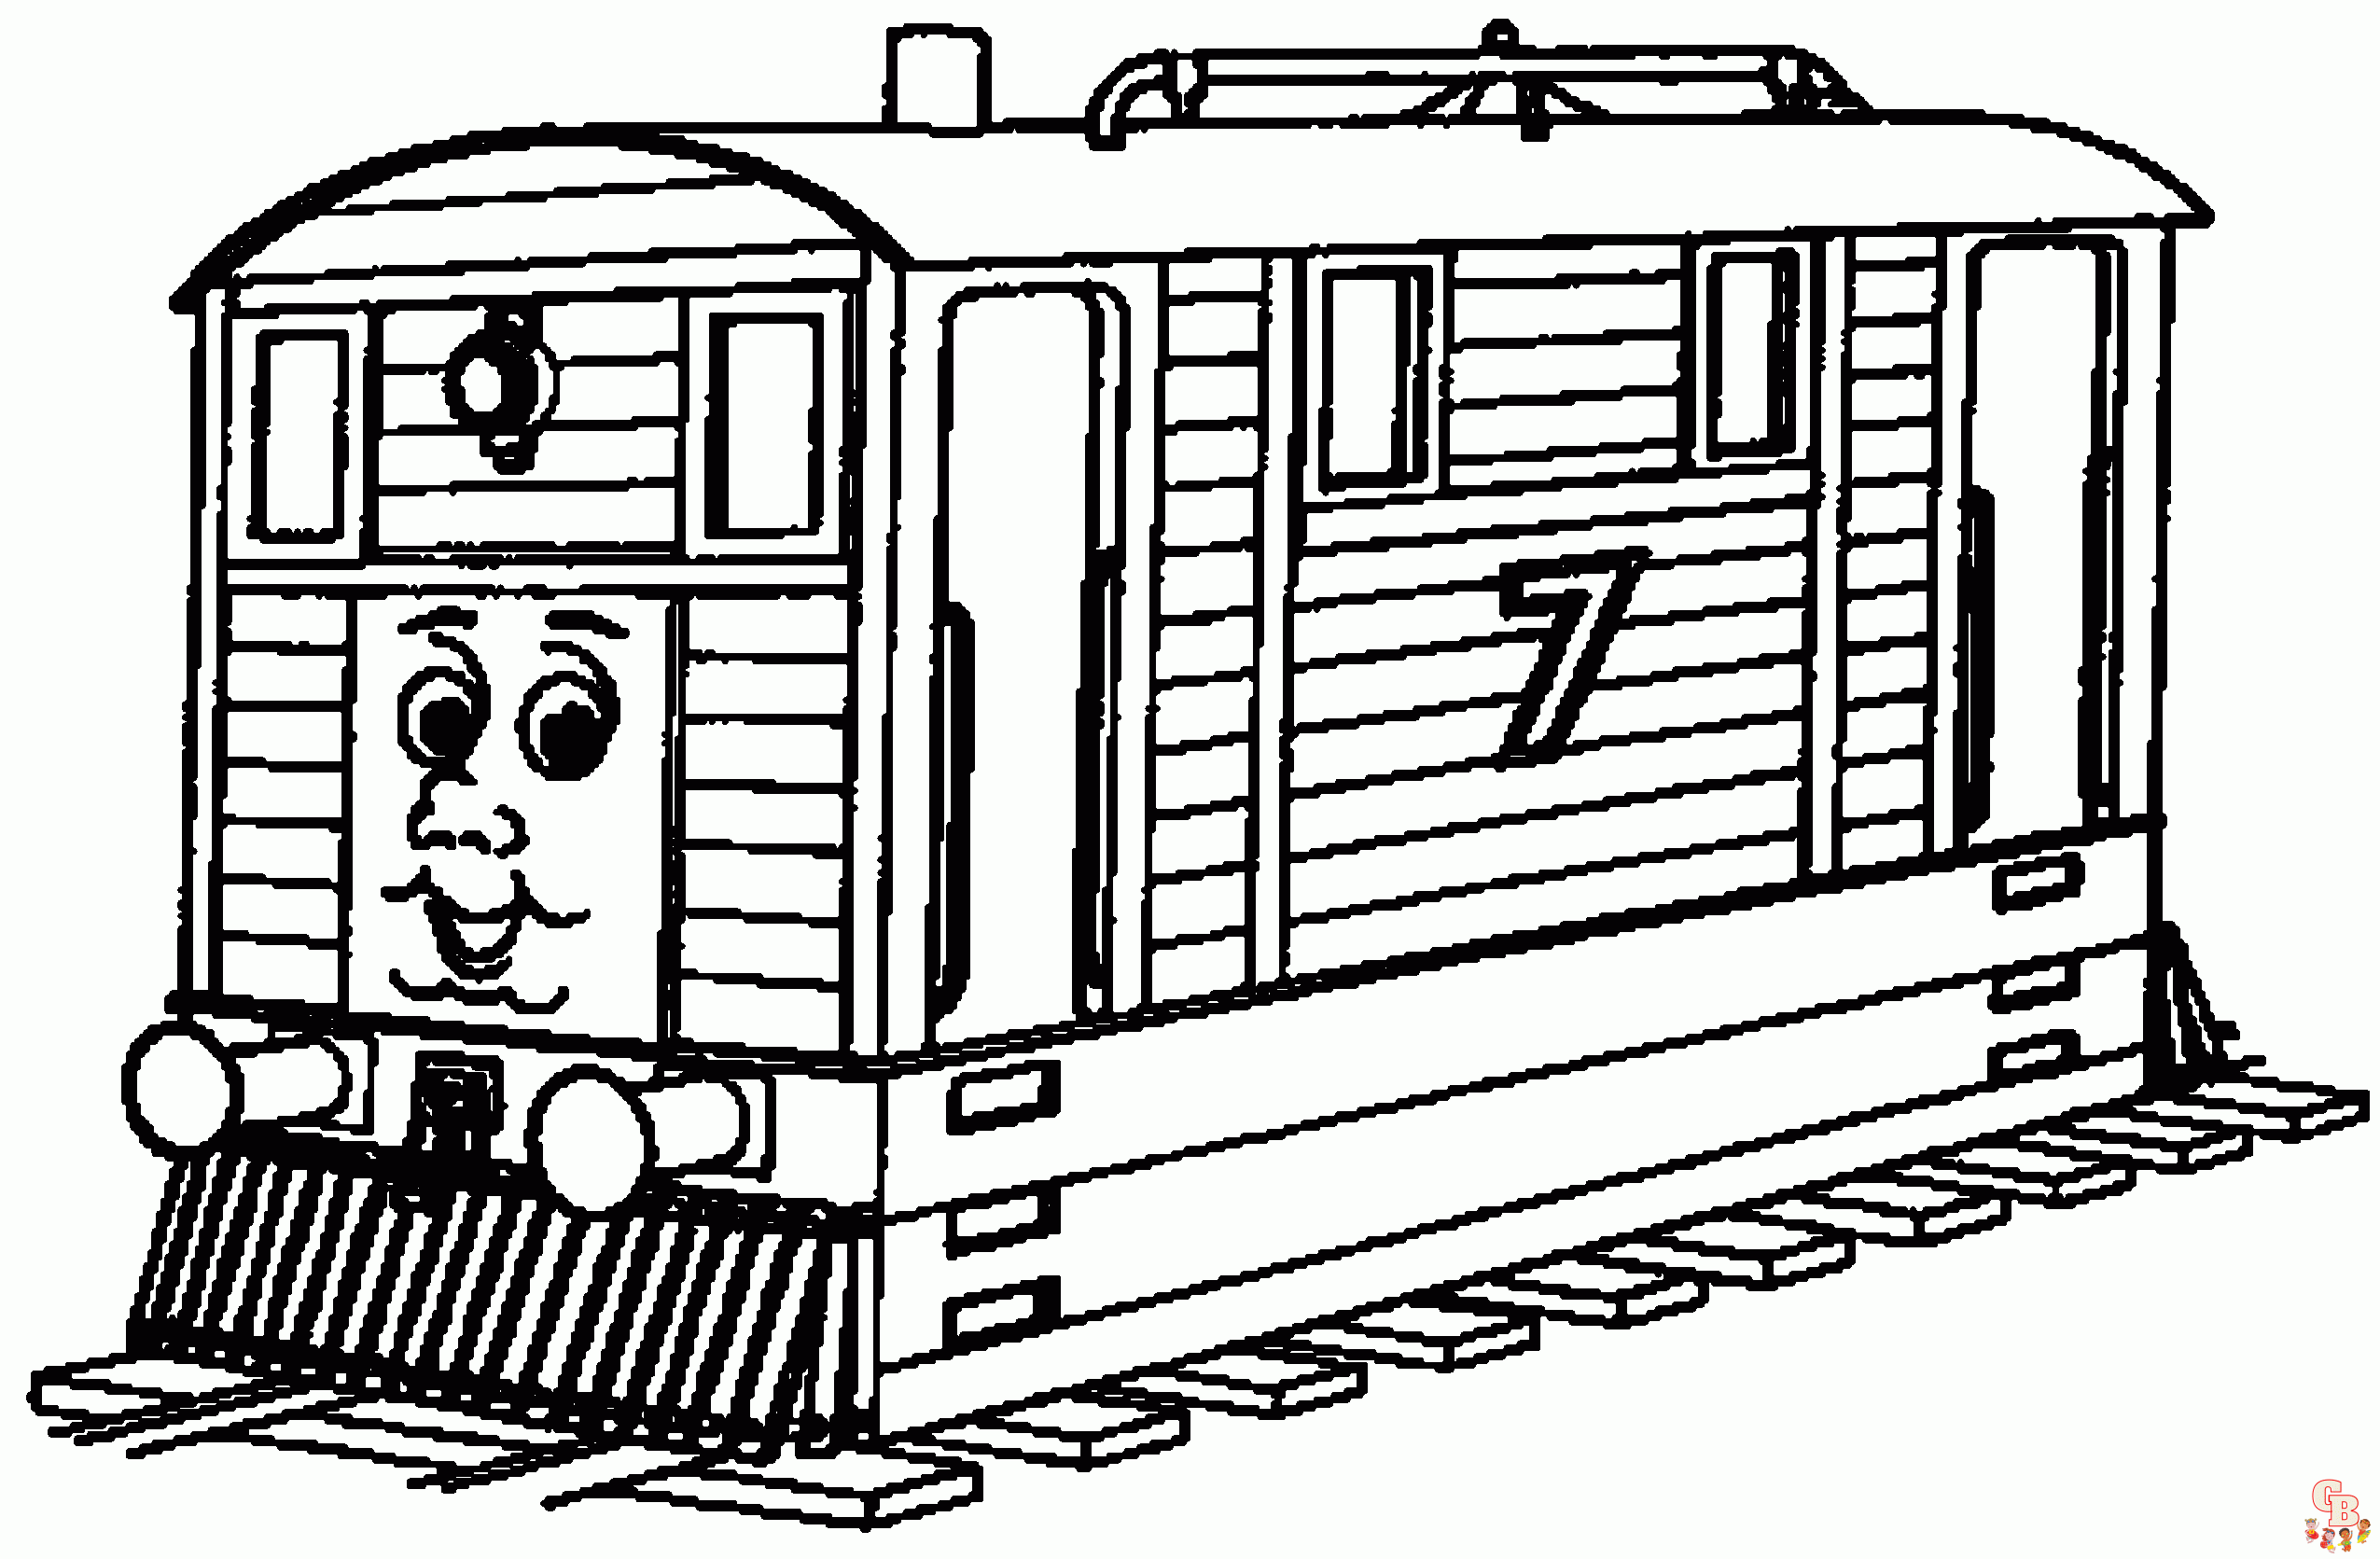 Thomas the Train coloring pages